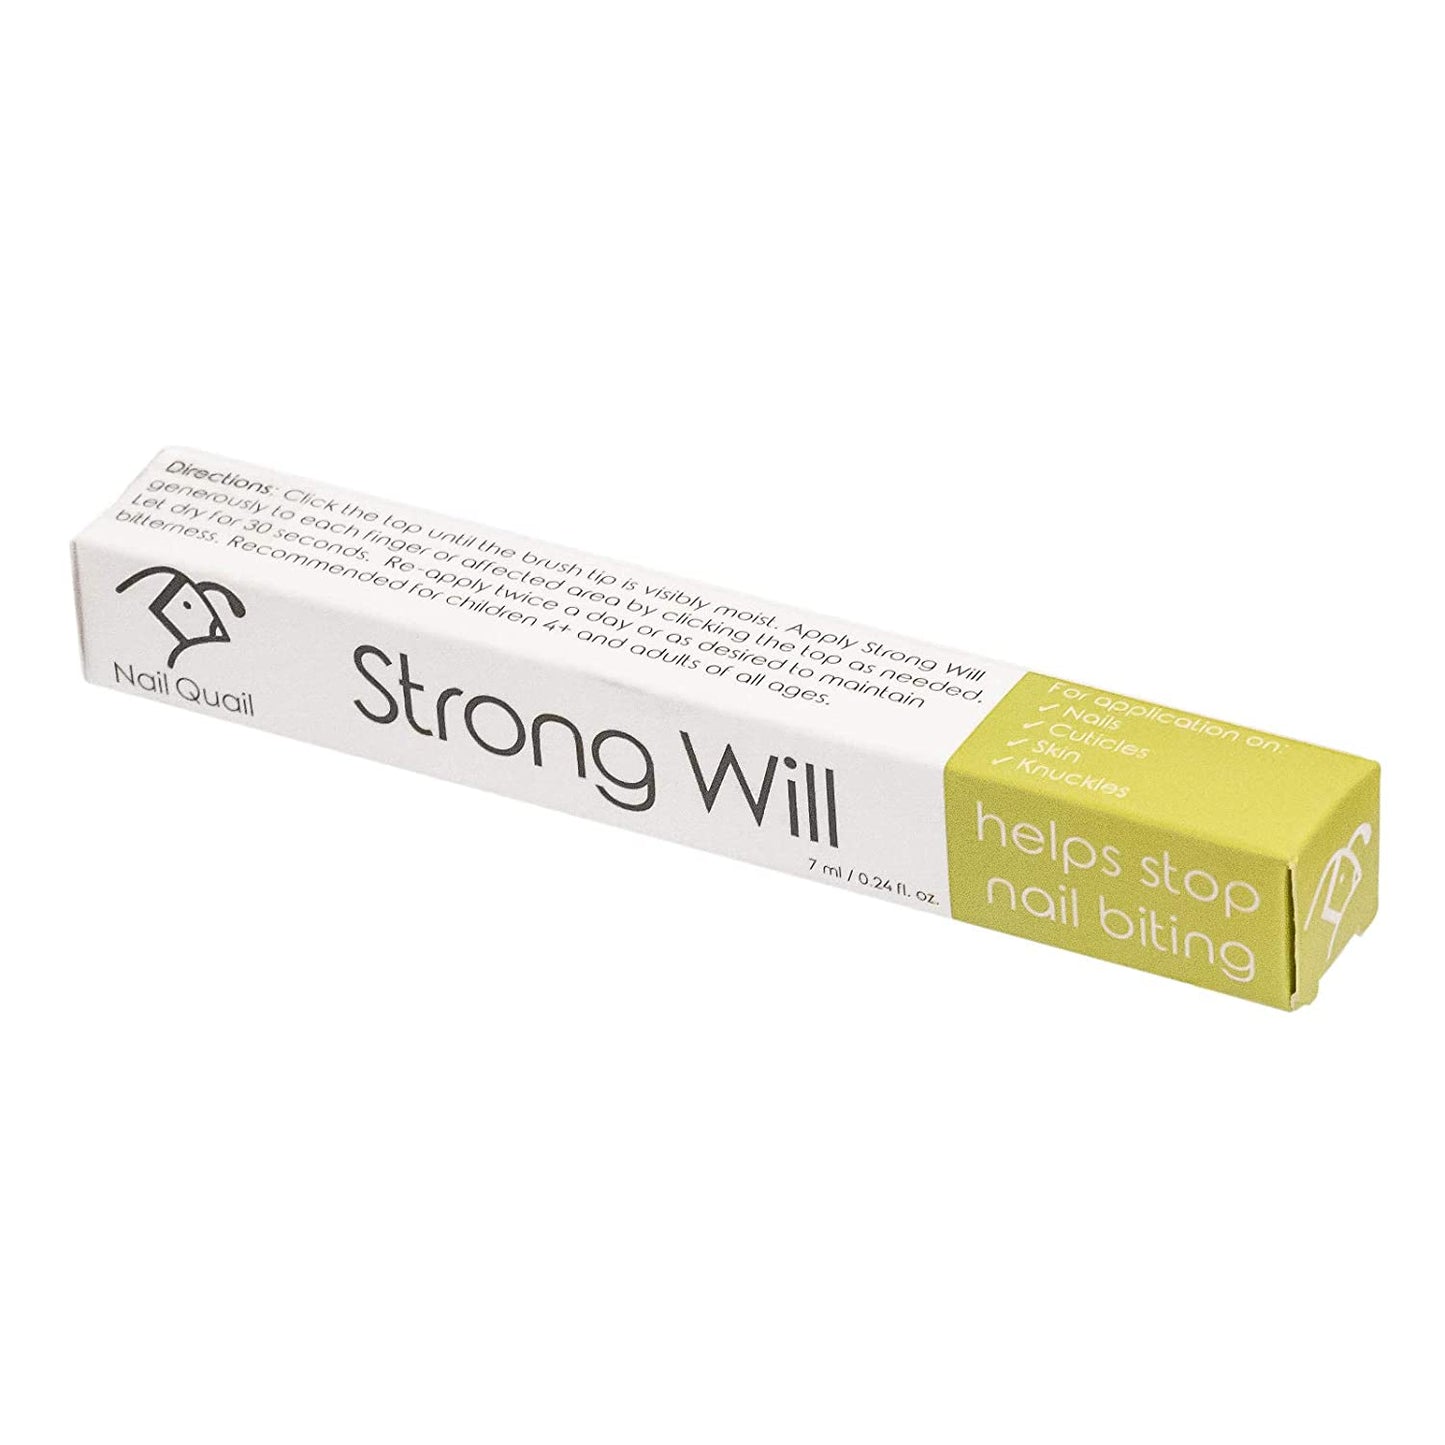 - Strong Will Anti-Nail Biting Click Pen, 7Ml, Made in USA